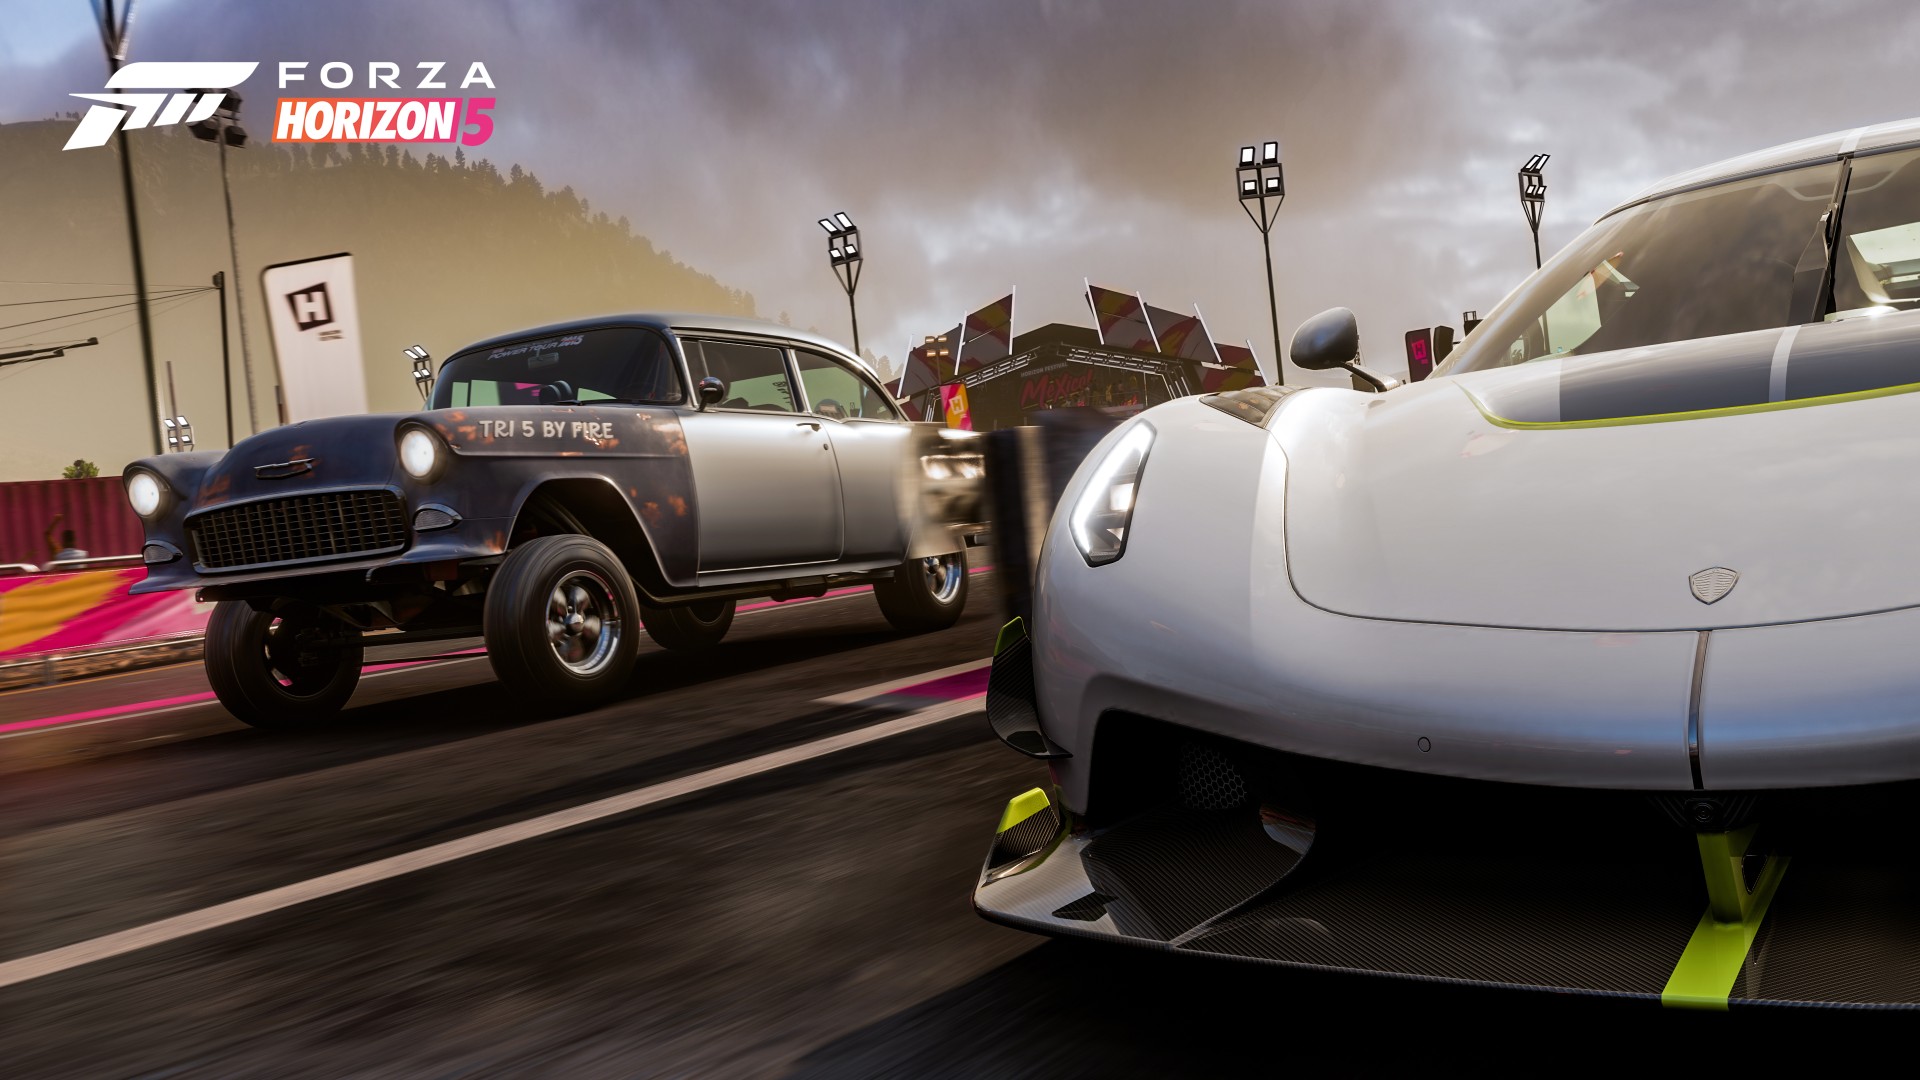 Preload Forza Horizon 5 in Early Access Today - Xbox Wire